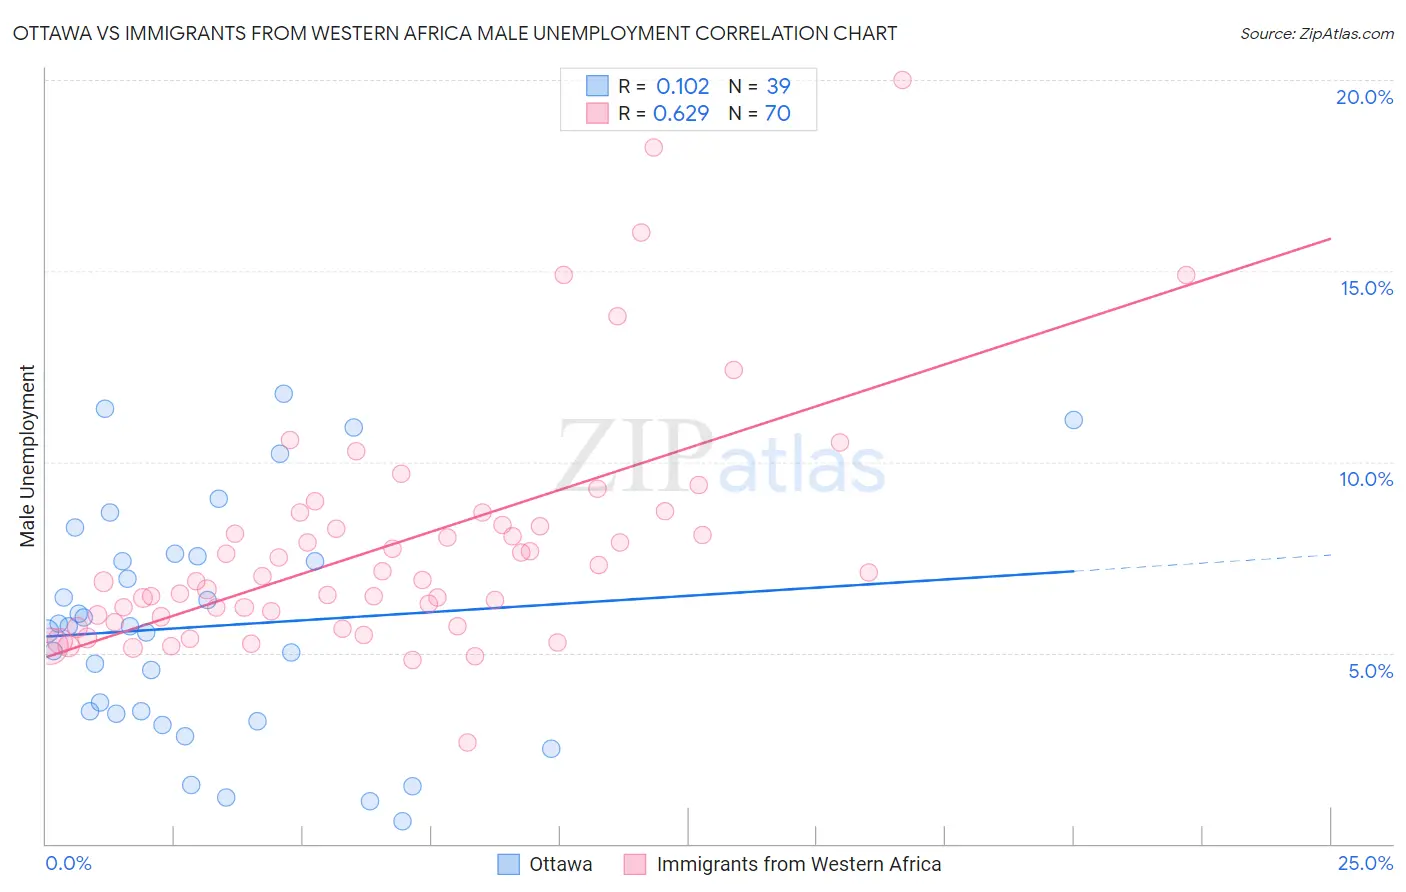 Ottawa vs Immigrants from Western Africa Male Unemployment